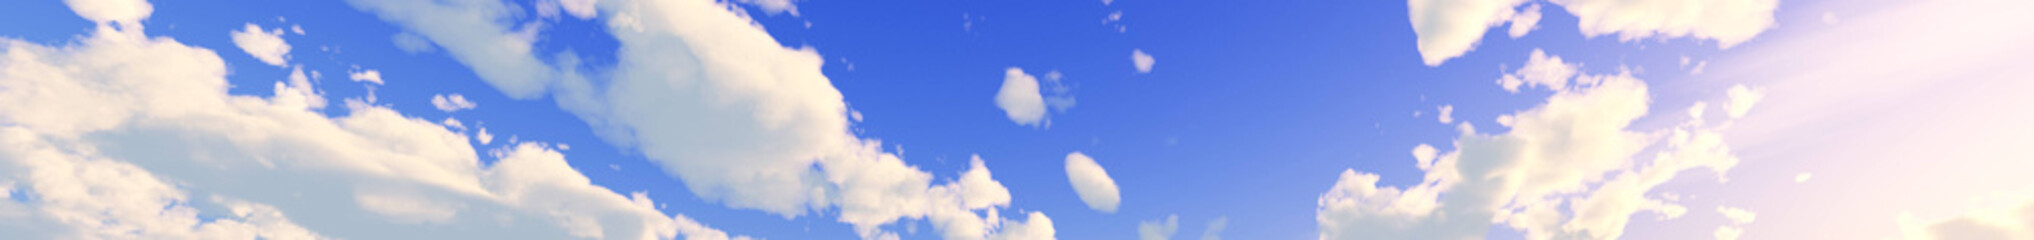 Sky with clouds, sky panorama, 3D rendering